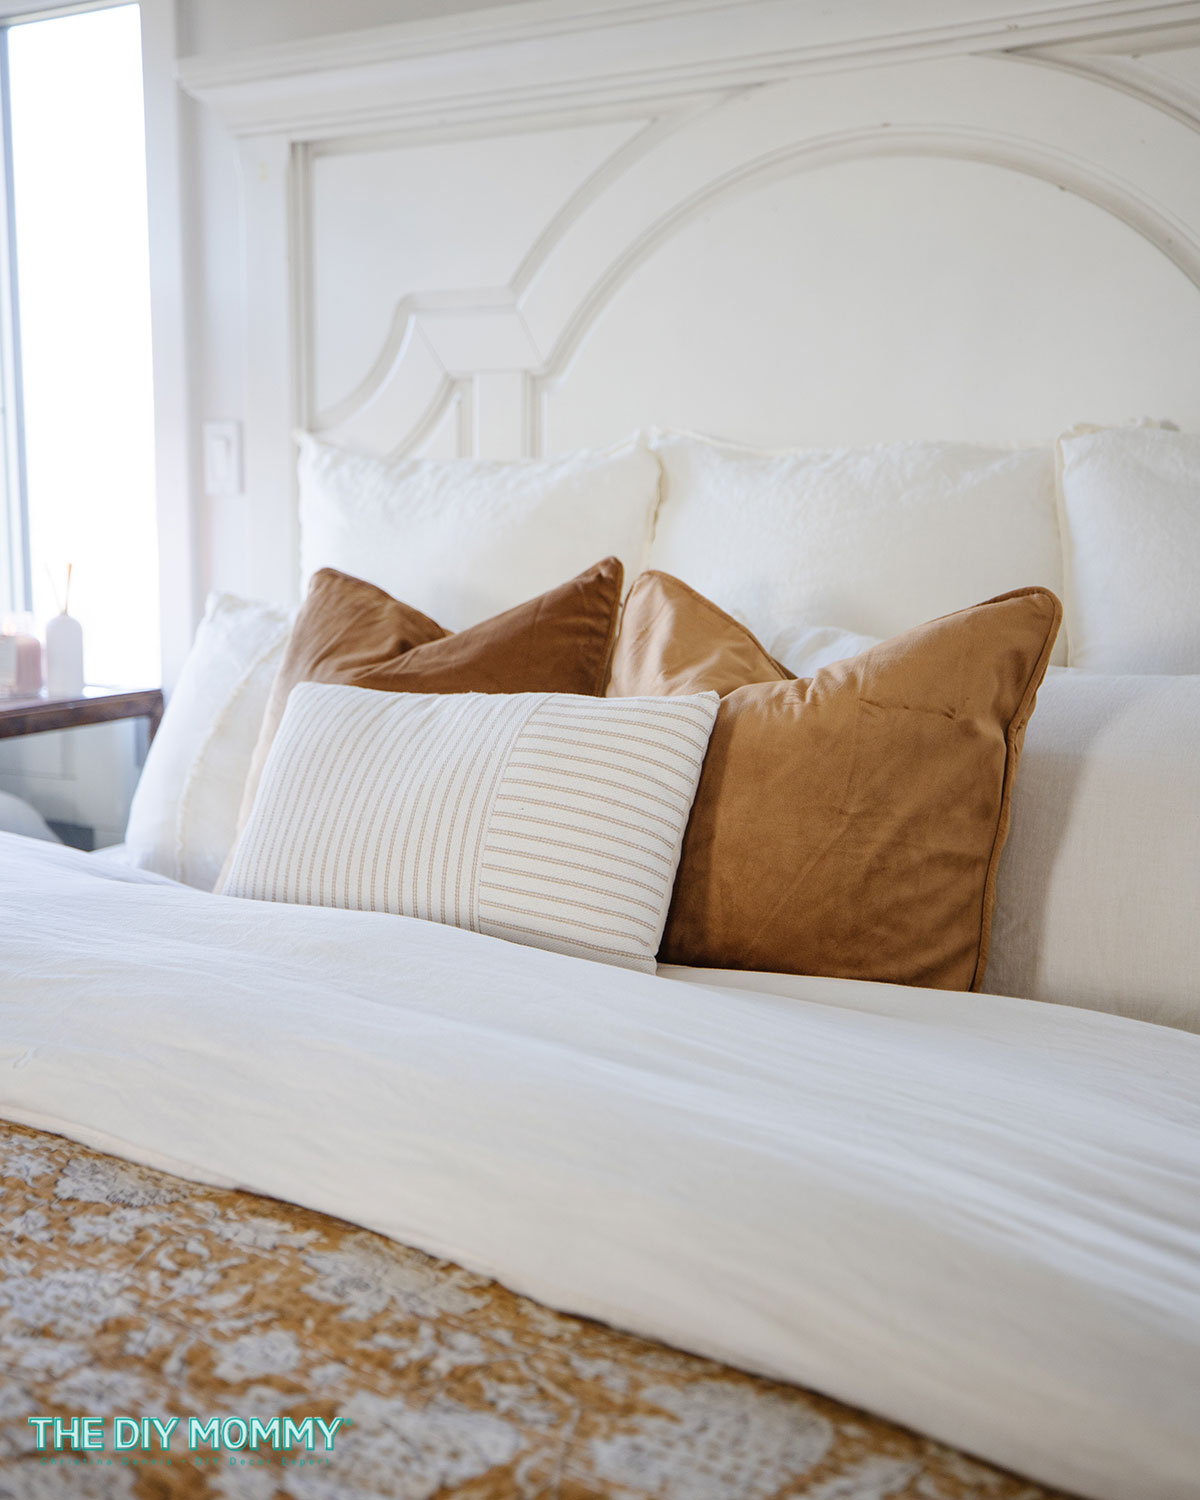 5 Steps to Make Your Bed Look Fluffy & Luxurious 